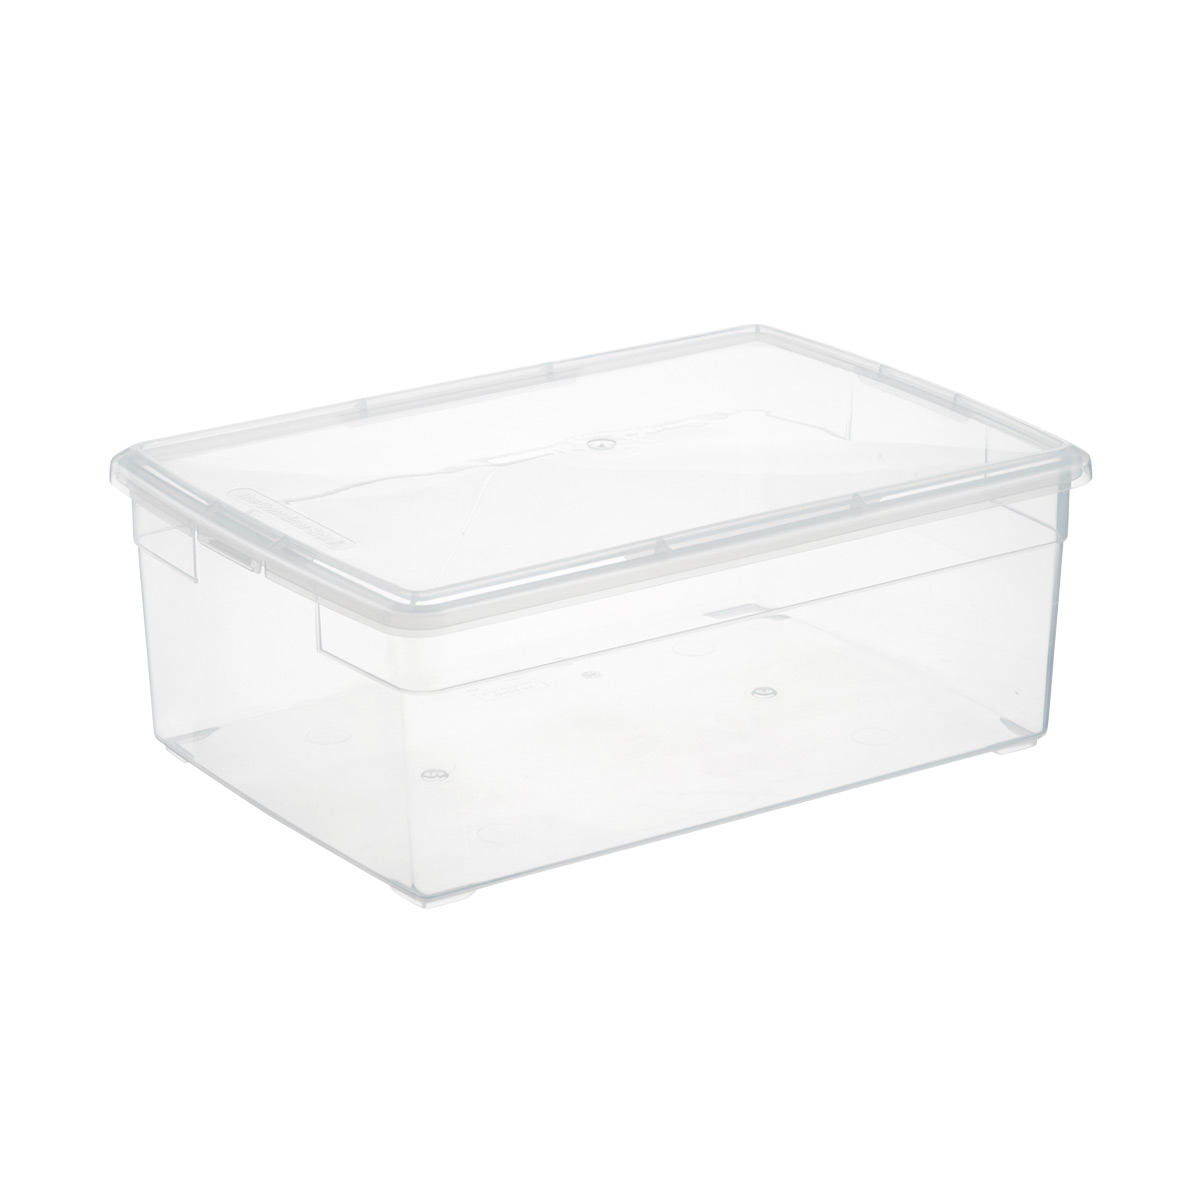 https://www.containerstore.com/catalogimages/356423/10008760-our-mens-shoe-box.jpg